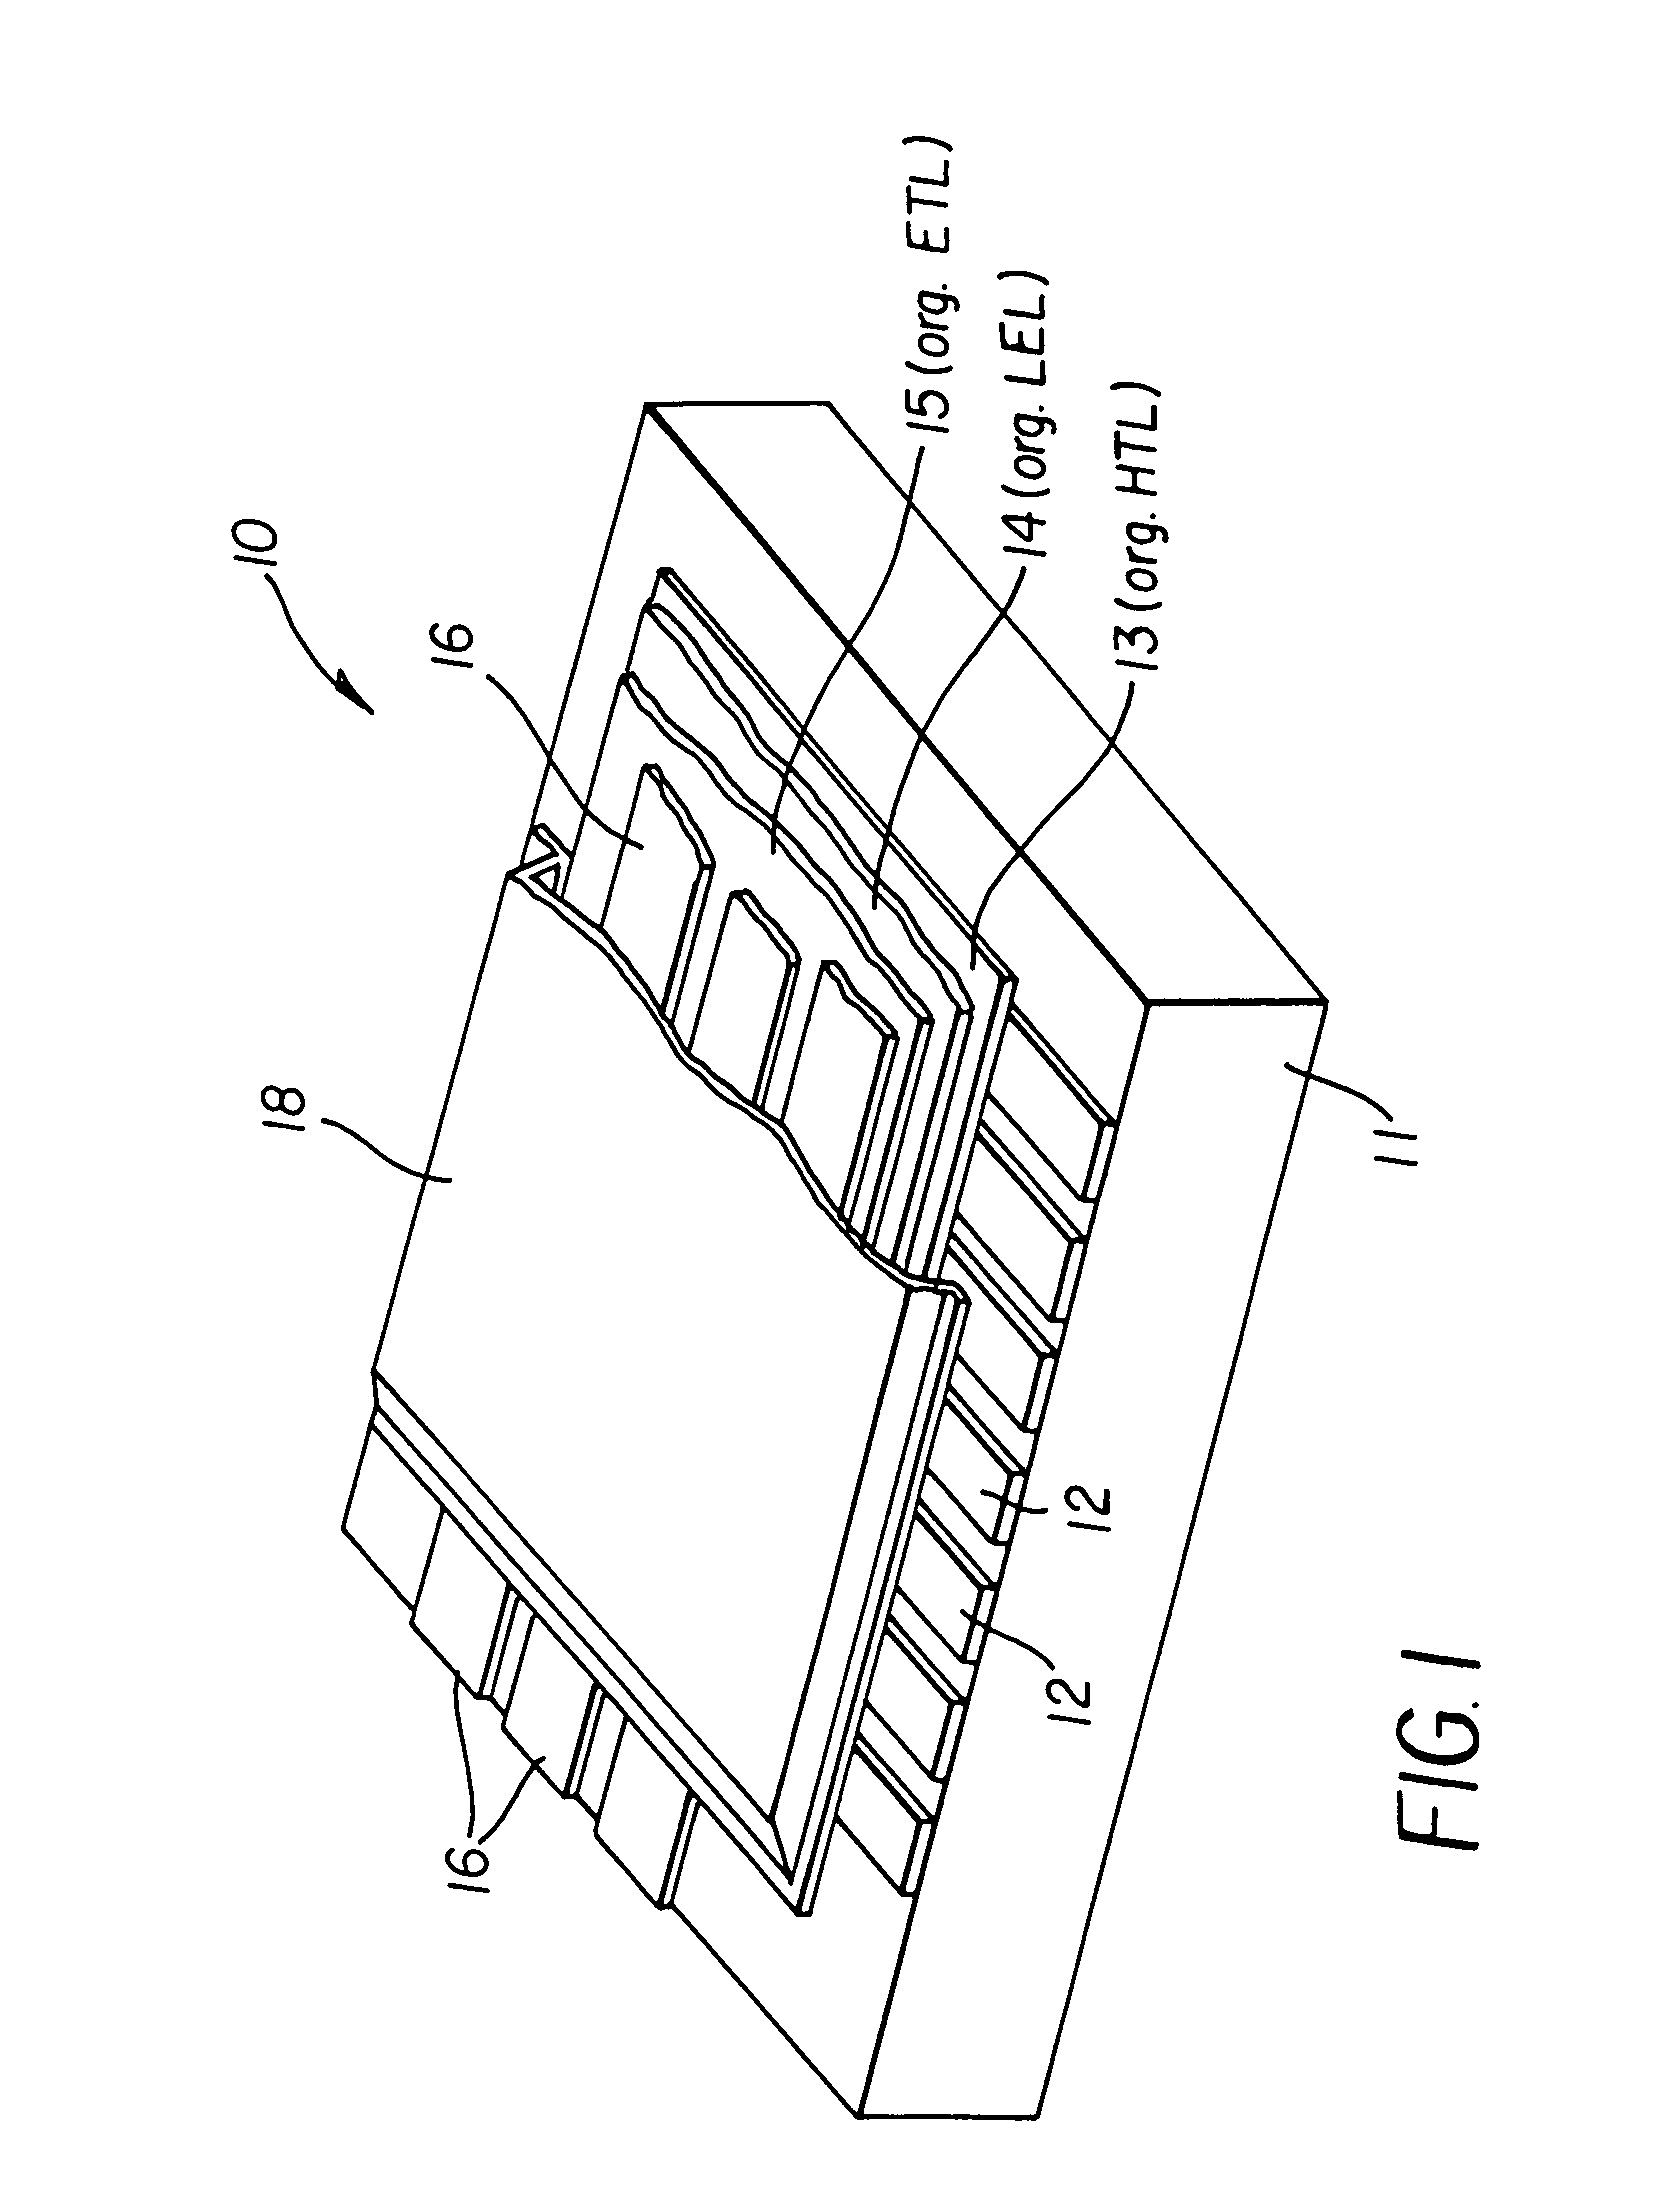 Depositing layers in OLED devices using viscous flow